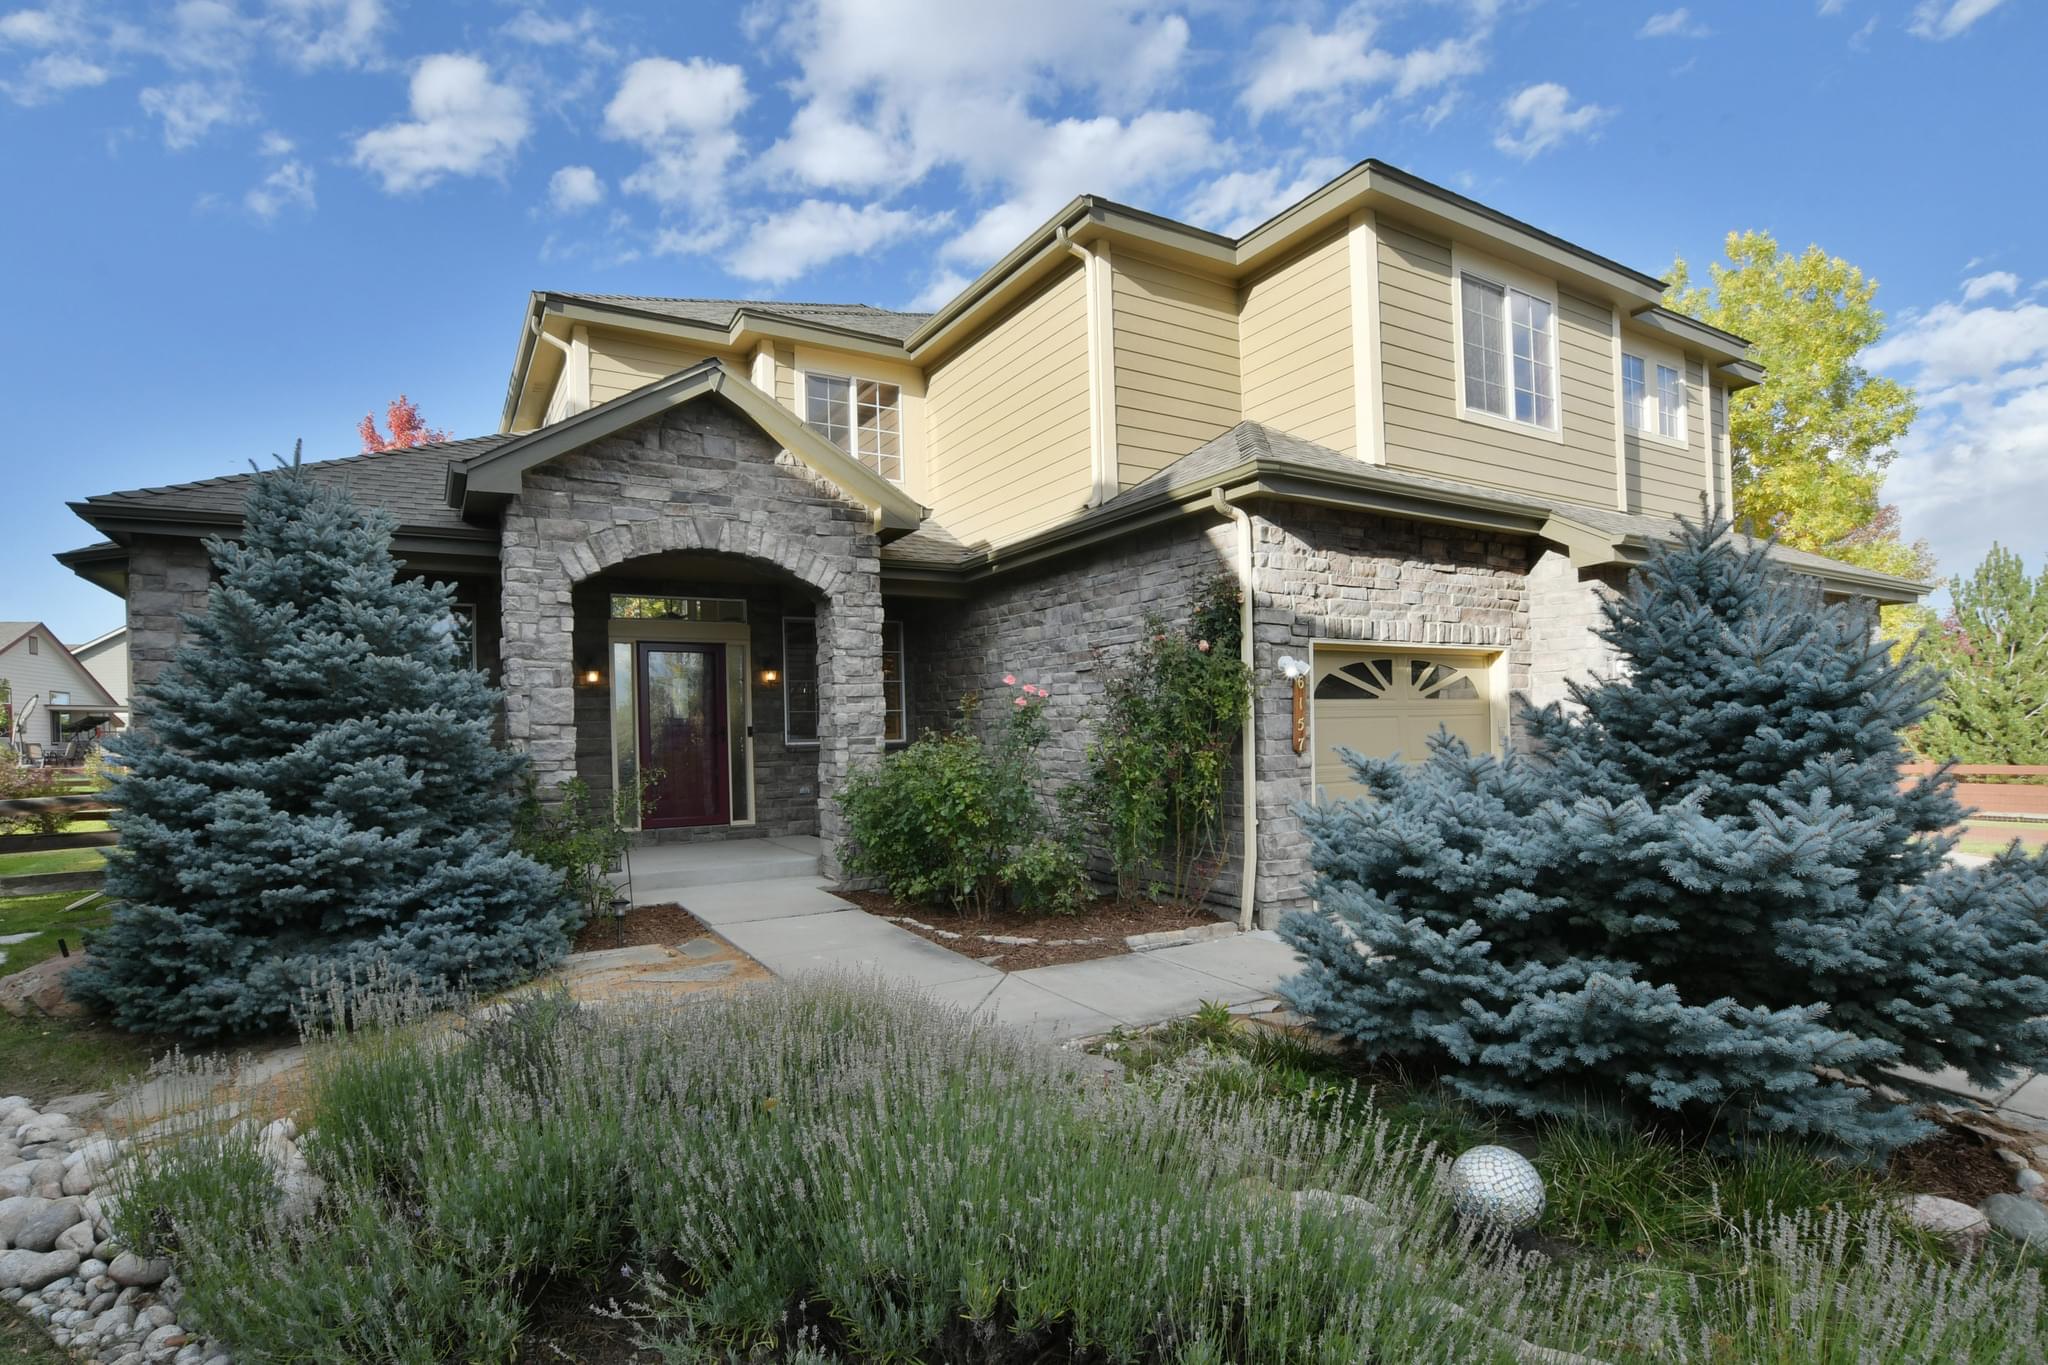  6157 Russell Ct, Golden, CO 80403, US Photo 2